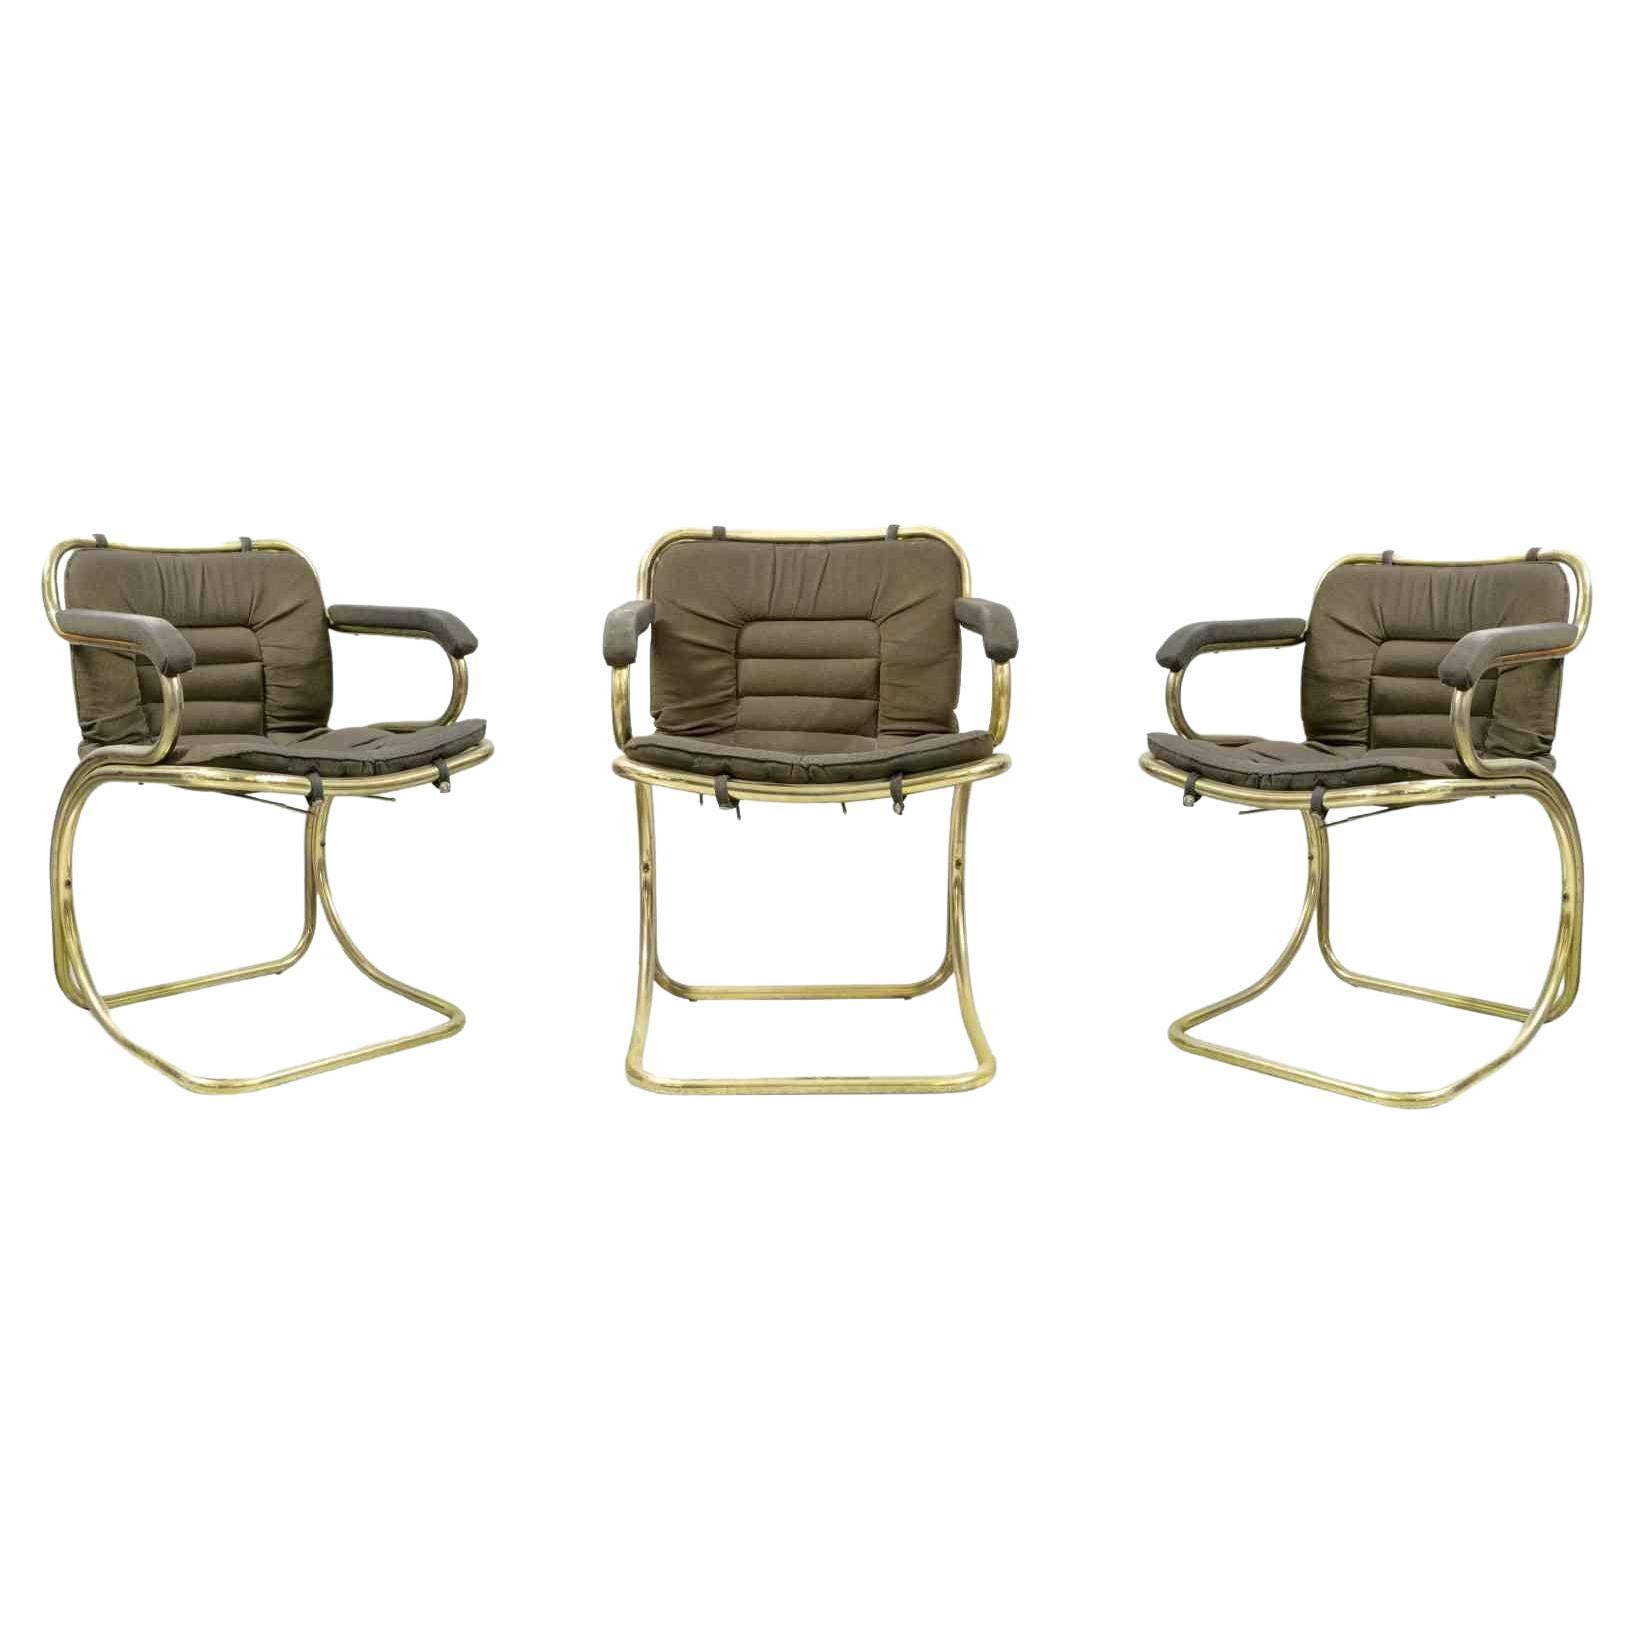 Set of 3 Cantilever Chairs by Gastone Rinaldi, Mid-20th Century For Sale